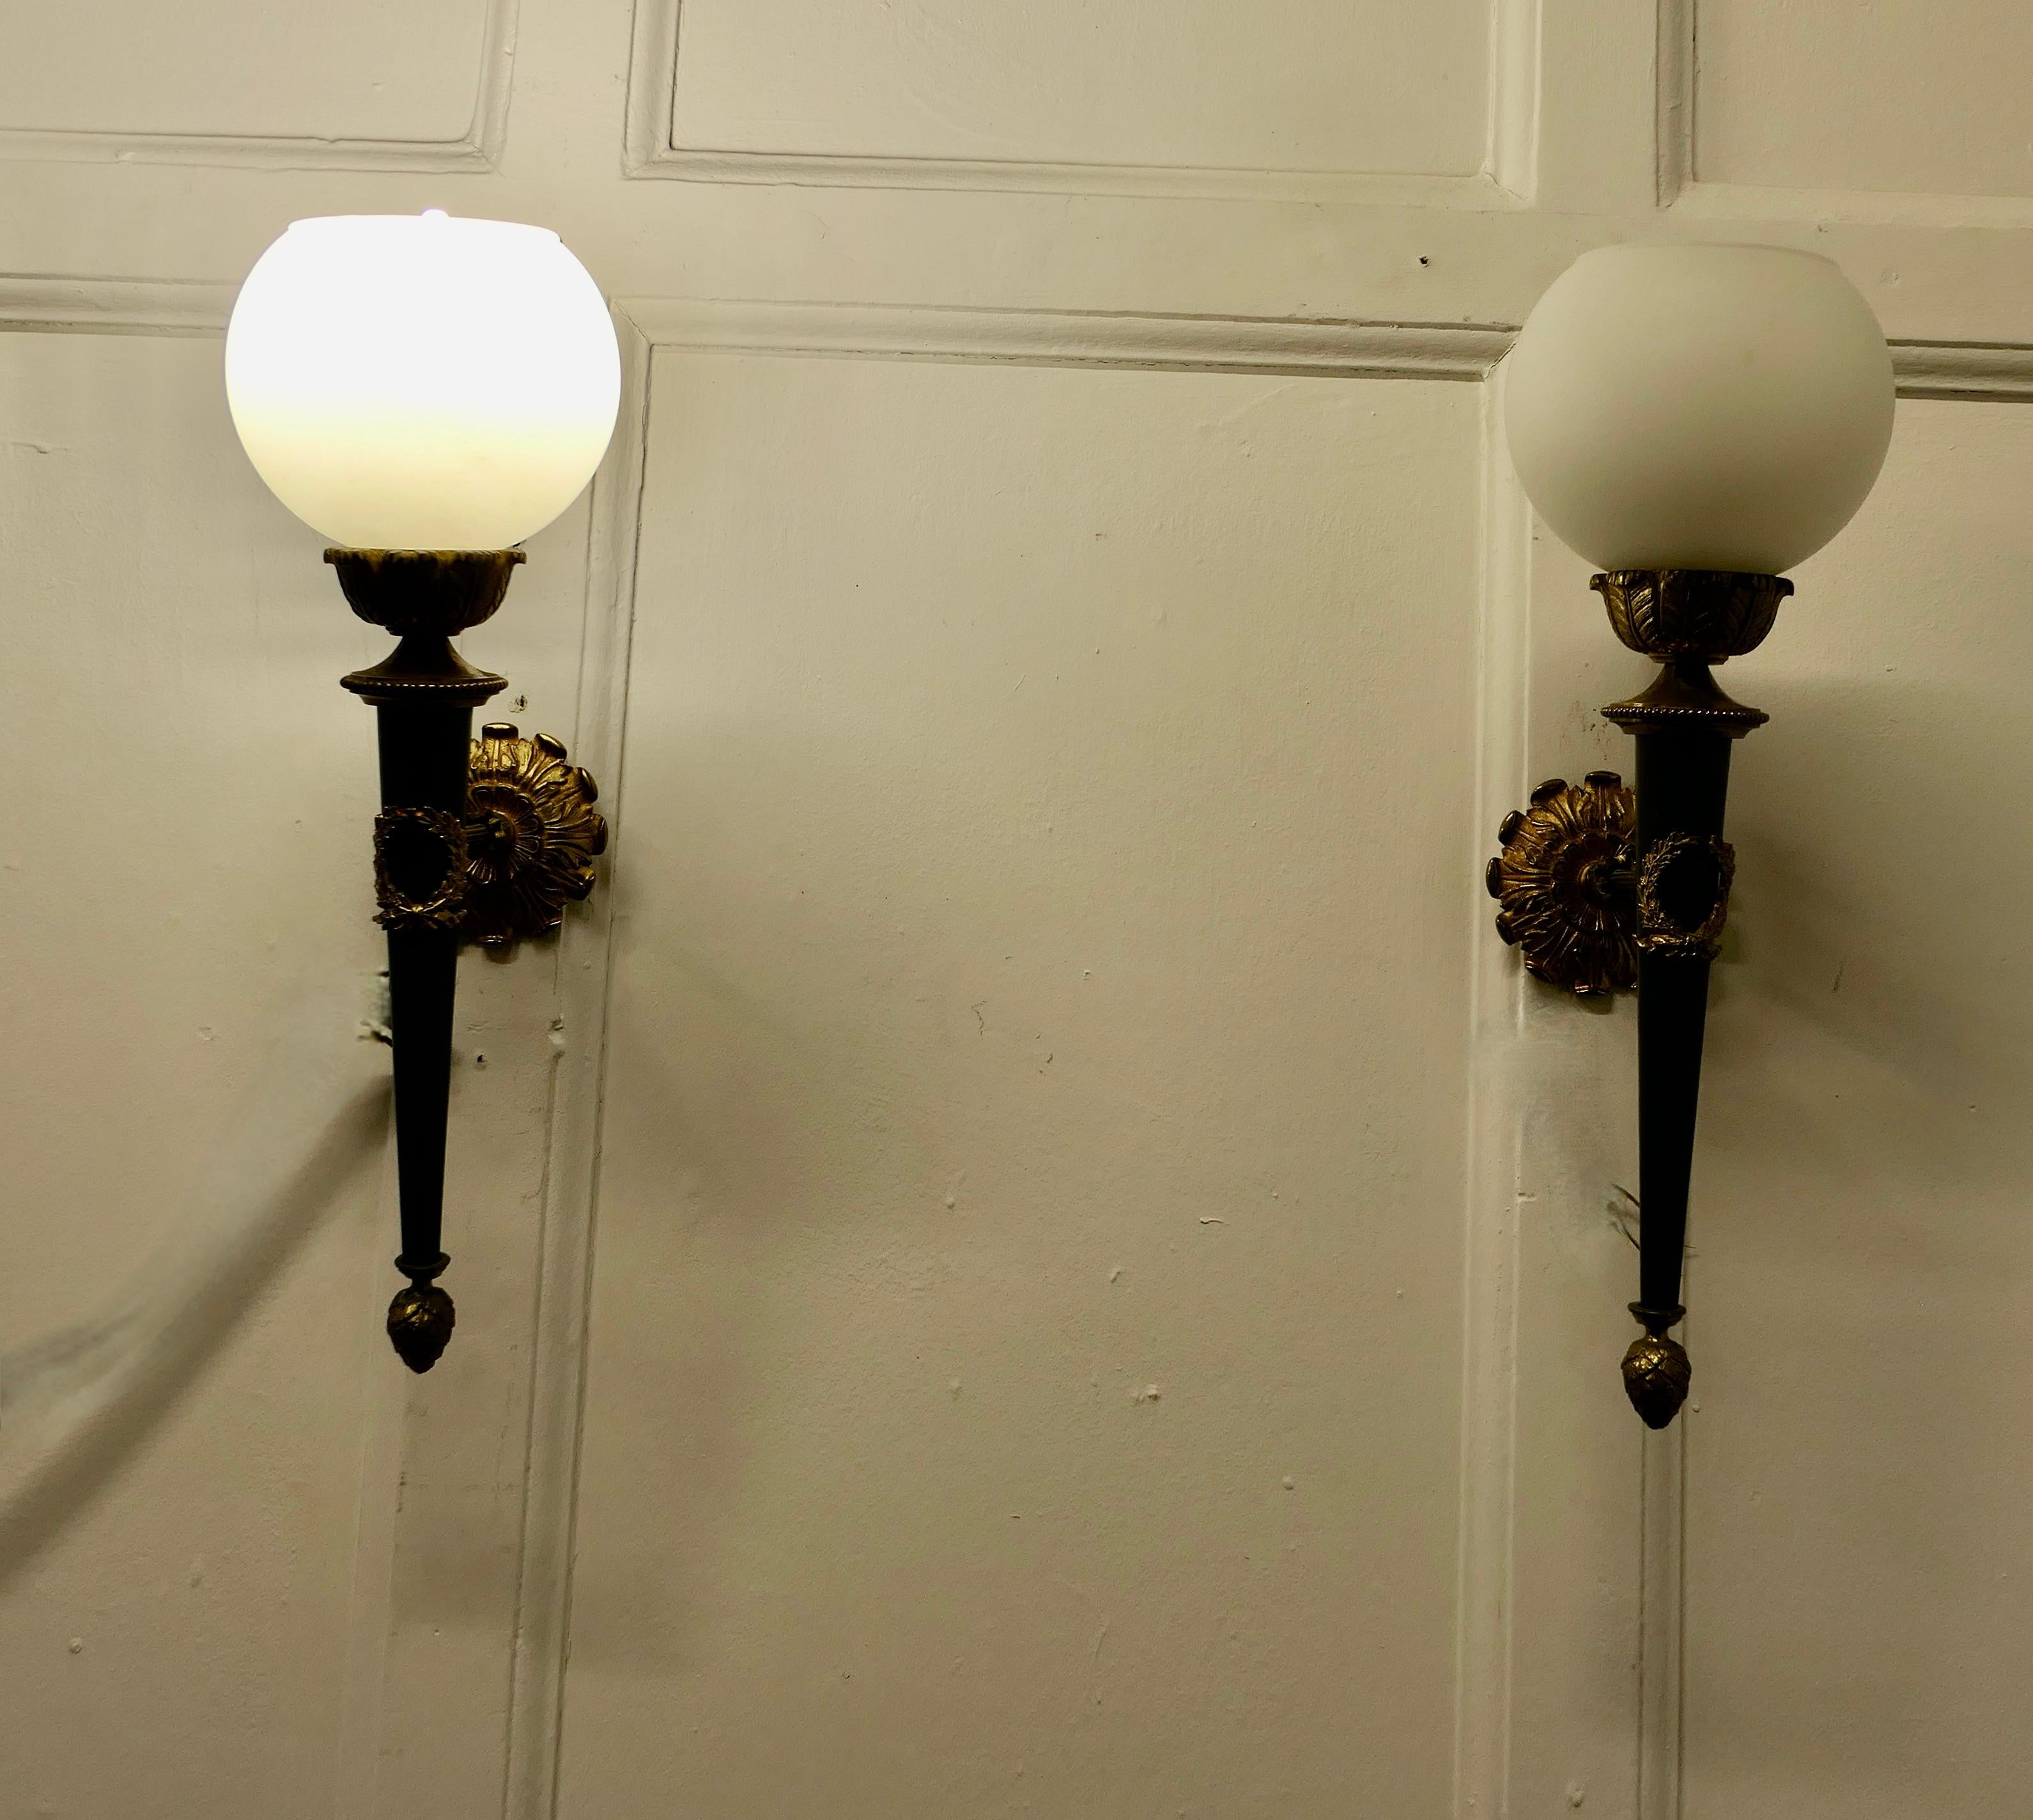 A Superb pair of French Ormolu Wall Lights

A very handsome pair of French wall lights, the lights are designed like an Olympian torch with an opaline glass shade and the brackets are set with ormolu 
The lights are in good and working condition,